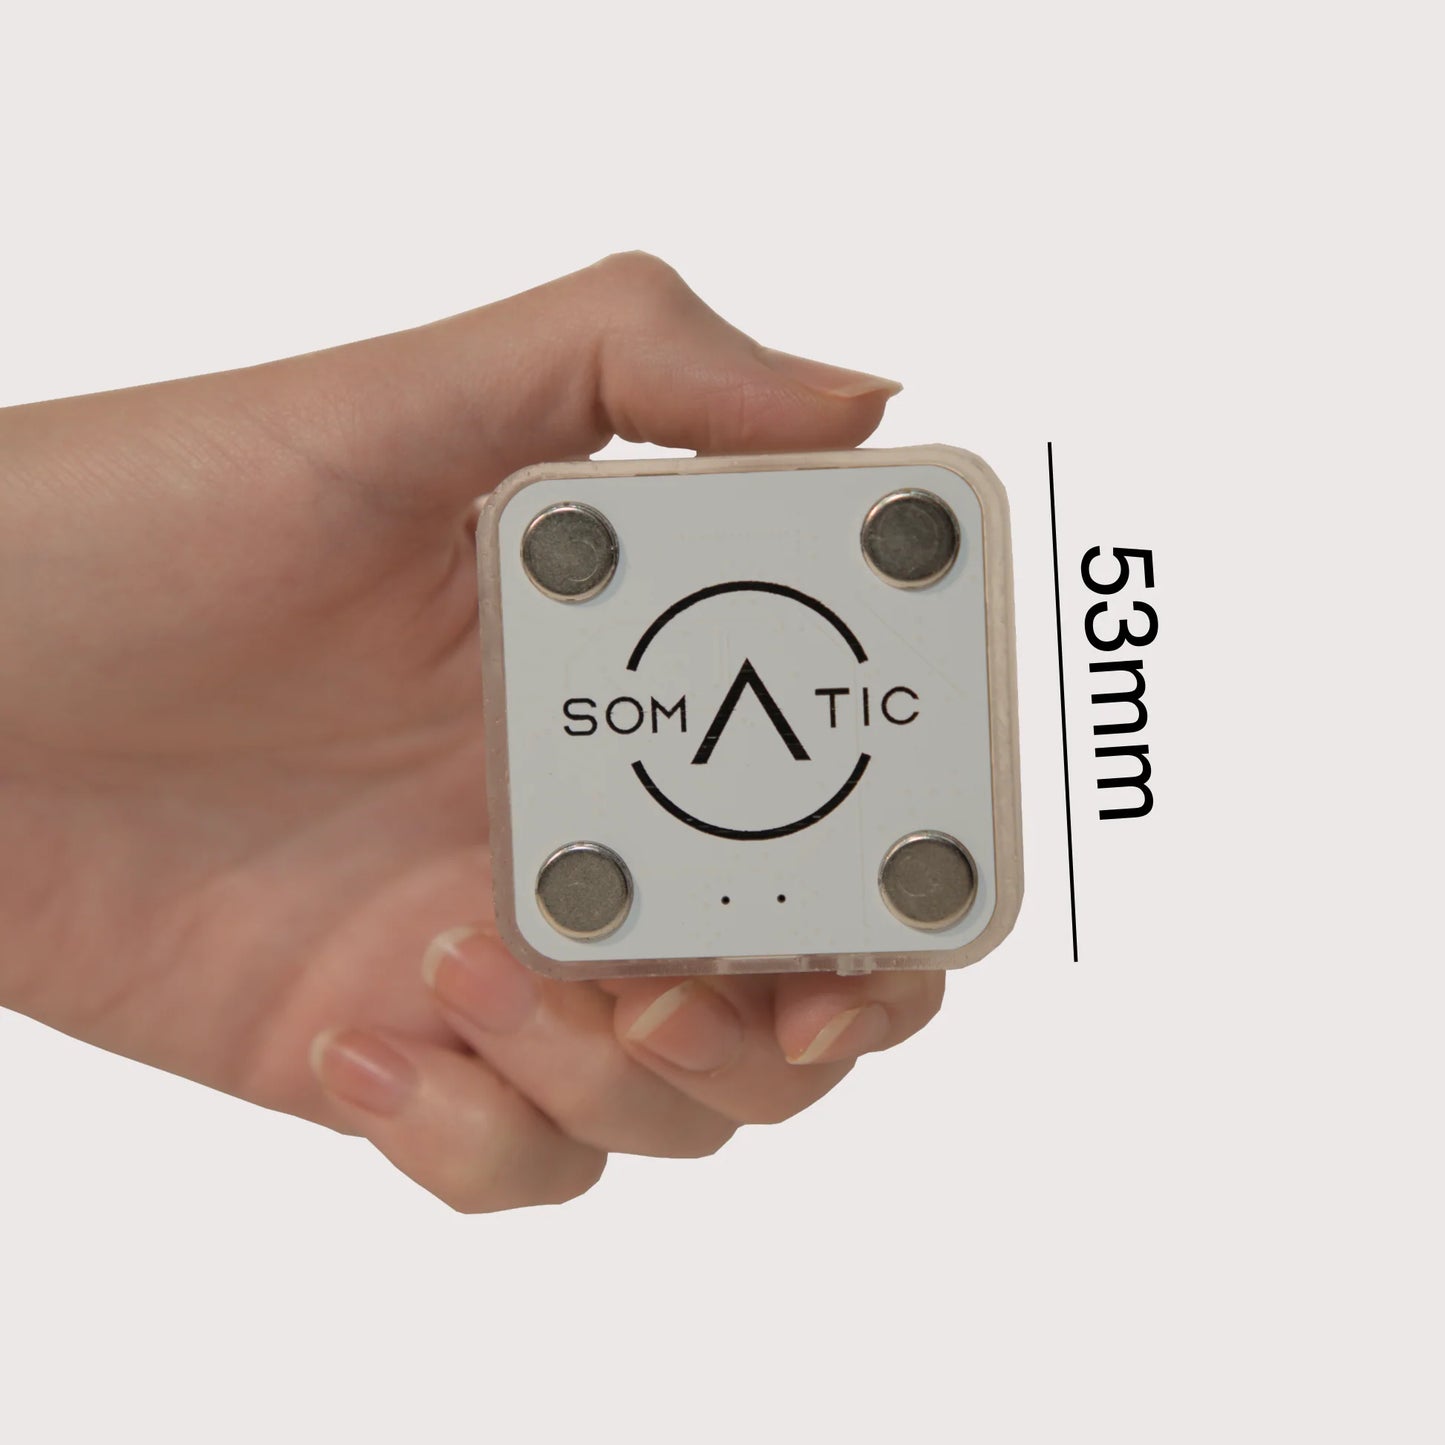 The EROS Tracker enables full-body tracking for Virtual Reality by communicating rotation data in a network of other trackers that can be used to calculate your movements. Each EROS Tracker measures 53mm x 53mm x 18mm.